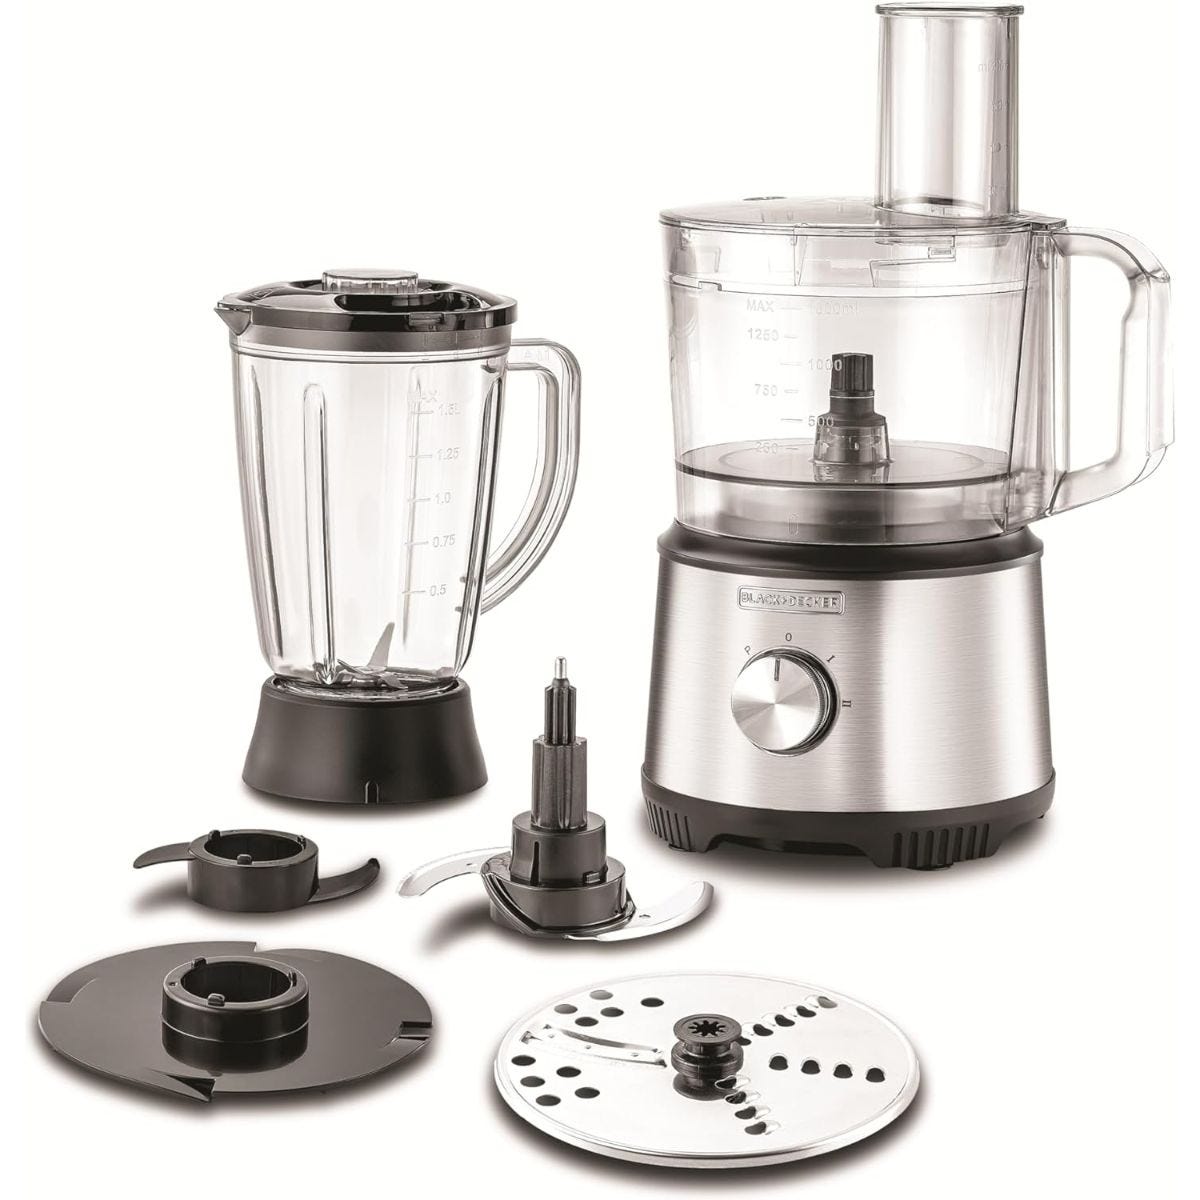 Food processor 800 watts - 24 functions - stainless steel -